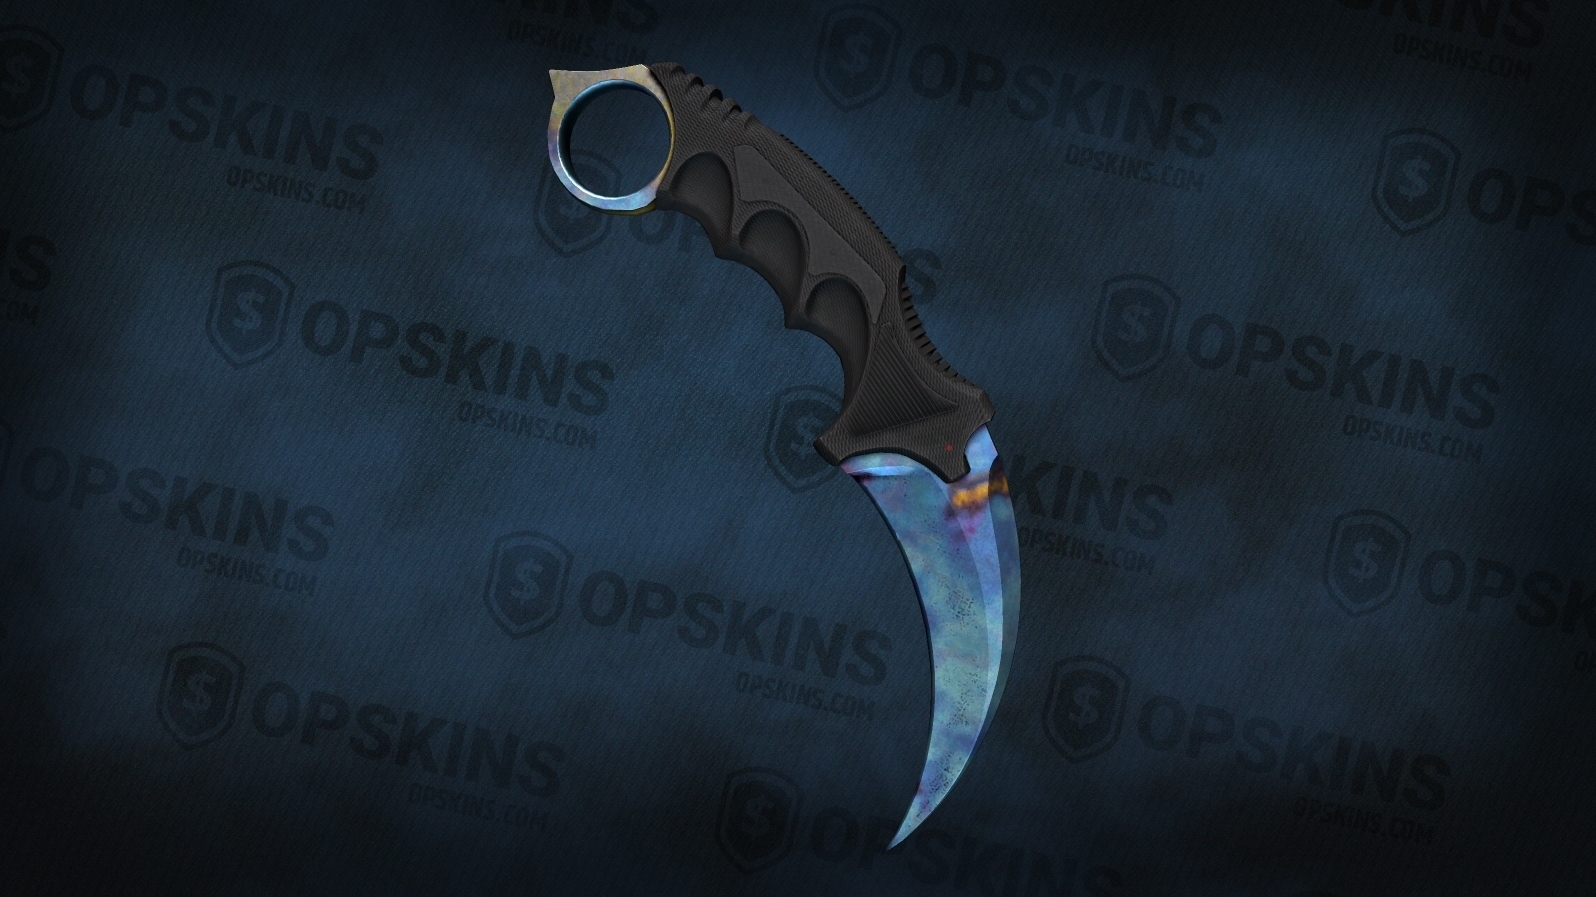 [Discussion] Lemme see your endgame knives! : r/GlobalOffensiveTrade